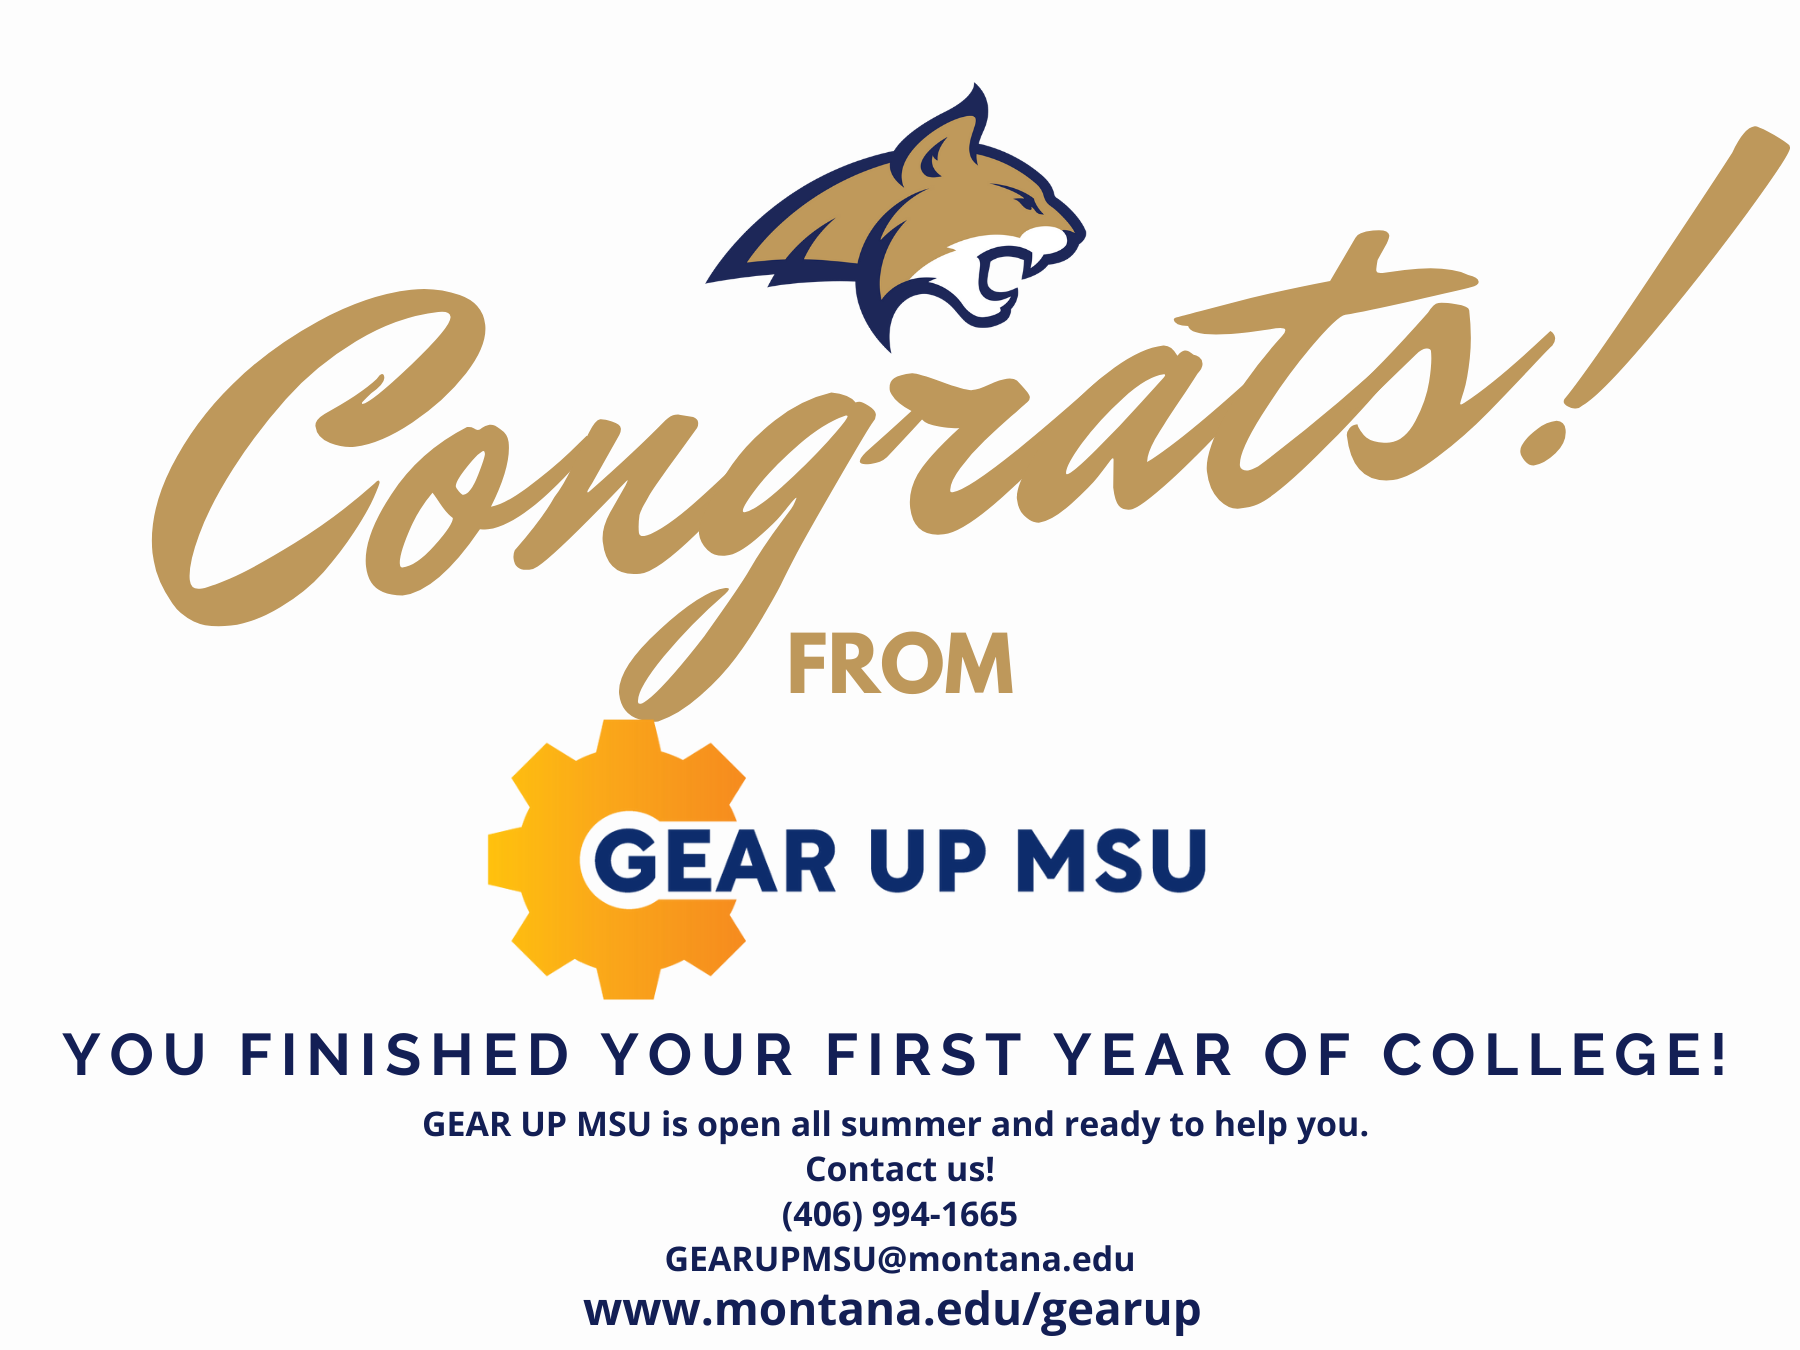 Congrats from GEAR UP MSU! You finished your fist year of college, GEAR UP MSU is open all summer and ready to help you!